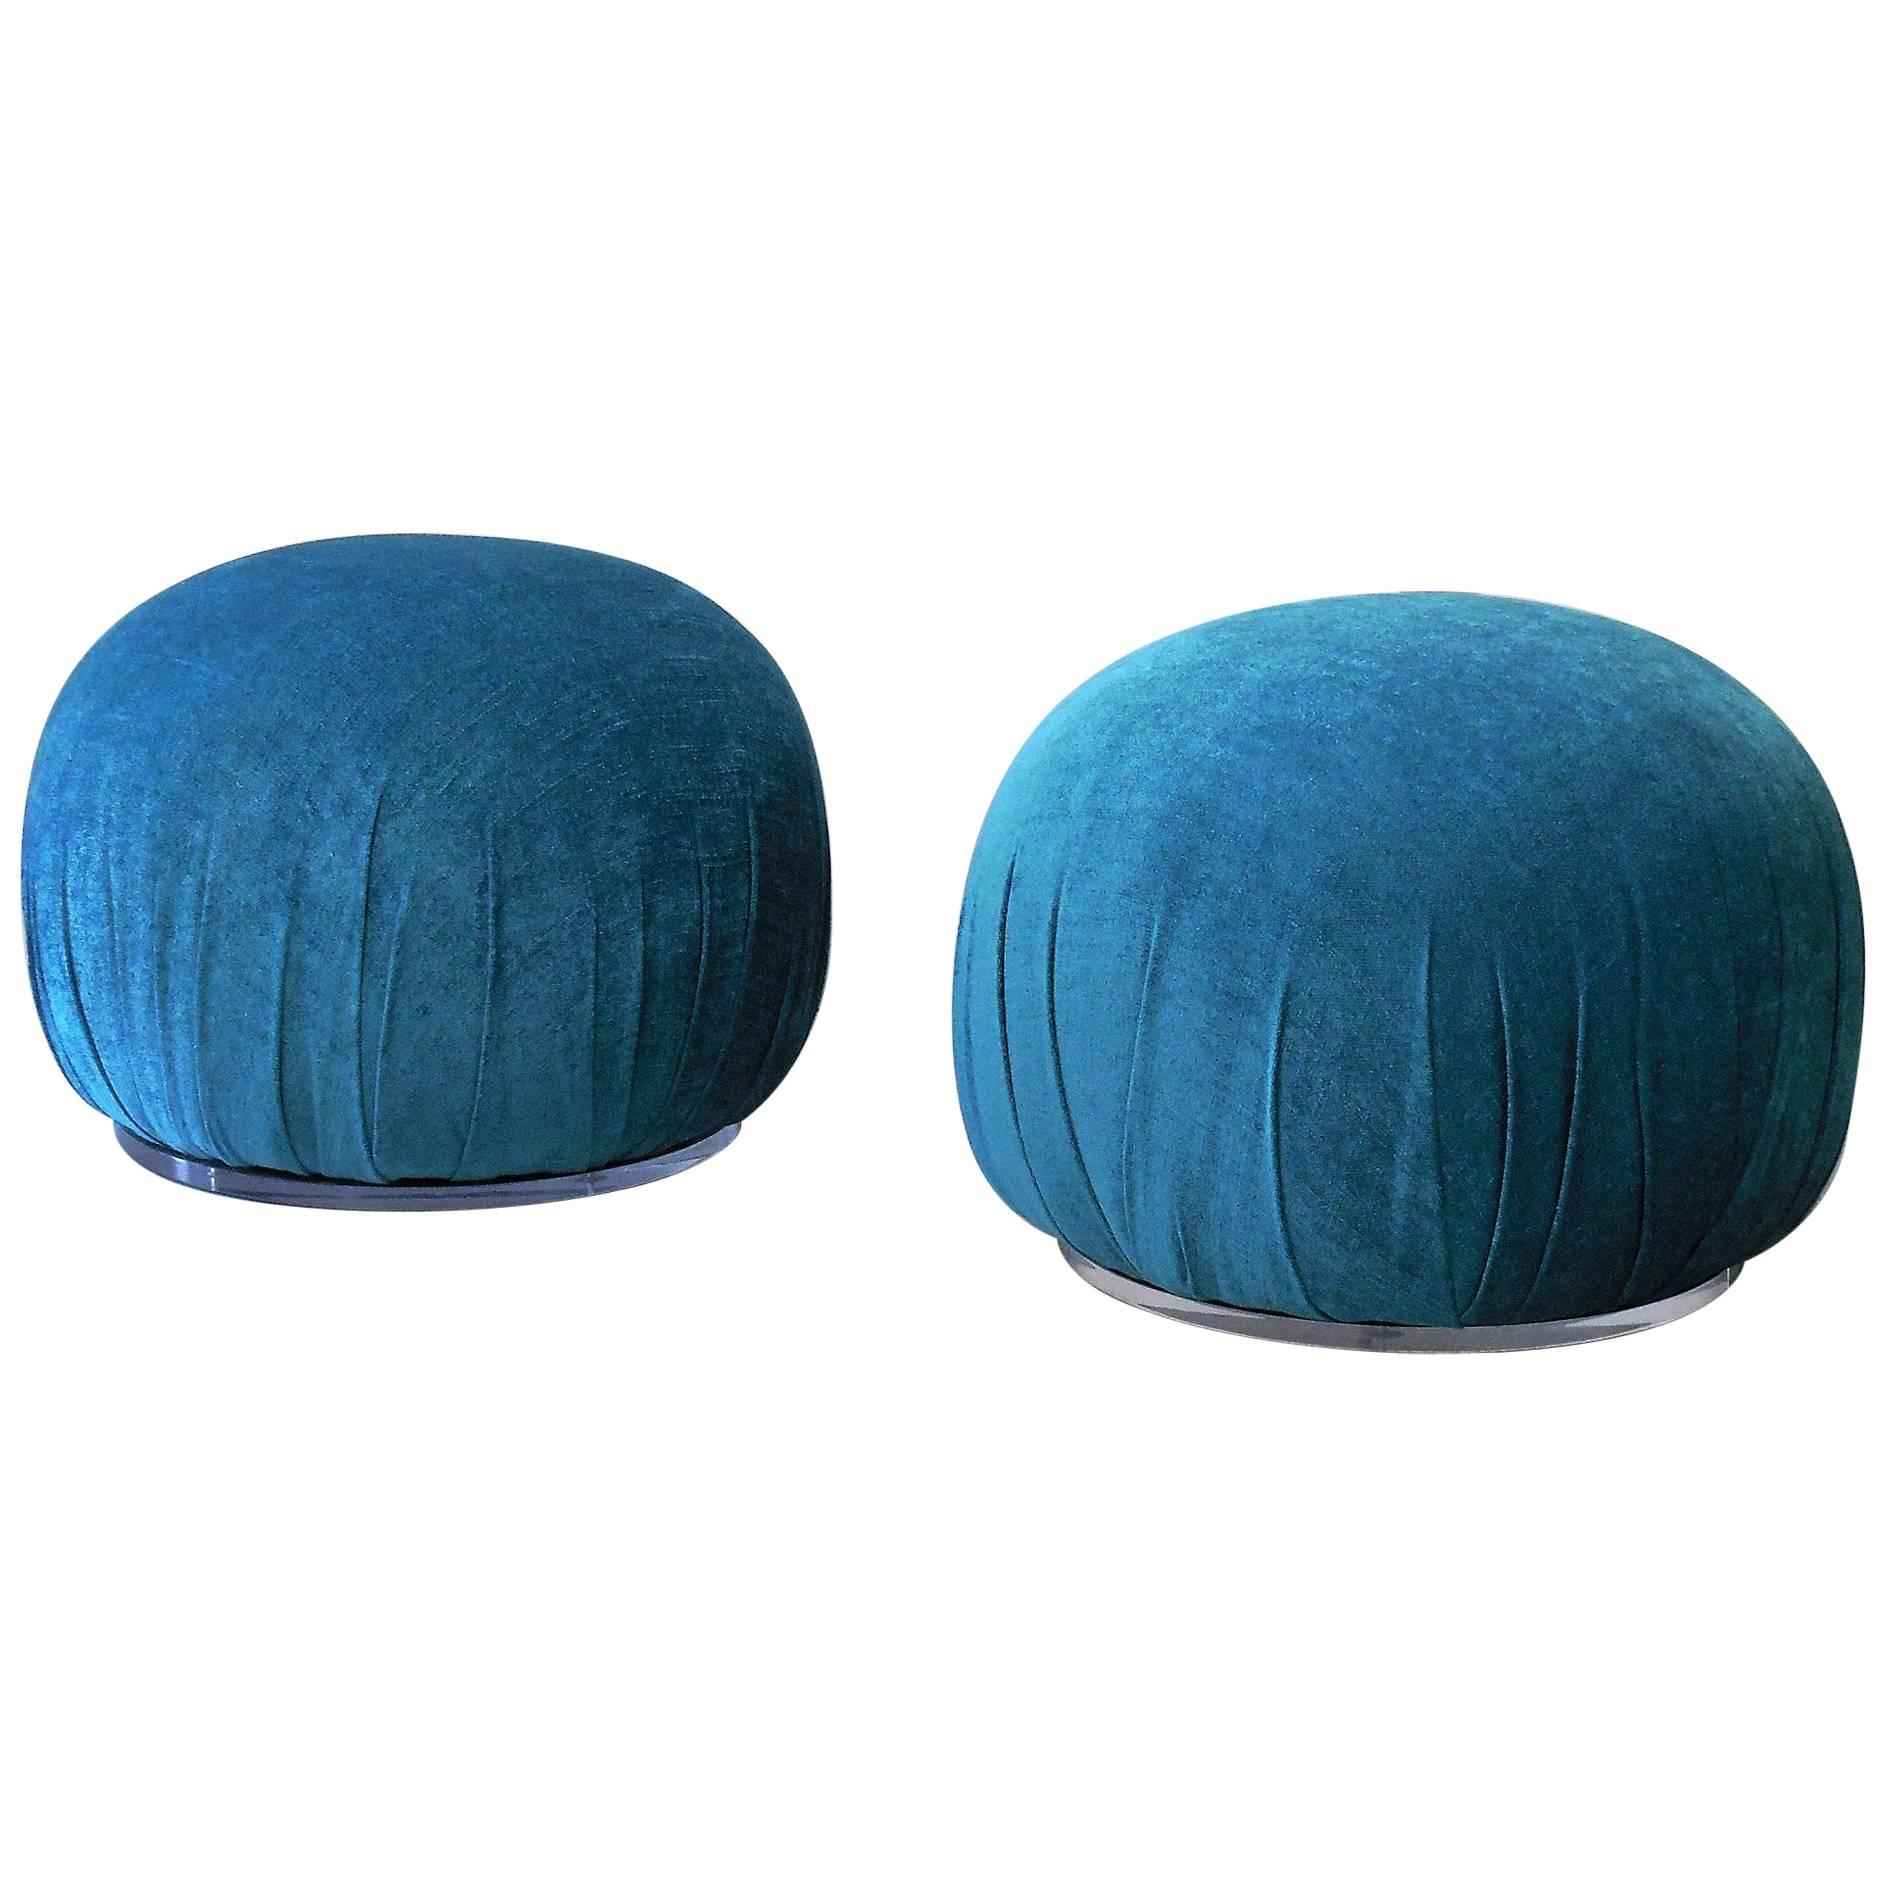 Pair of Turquoise Pouf Ottomans with Lucite Bases, 1980s